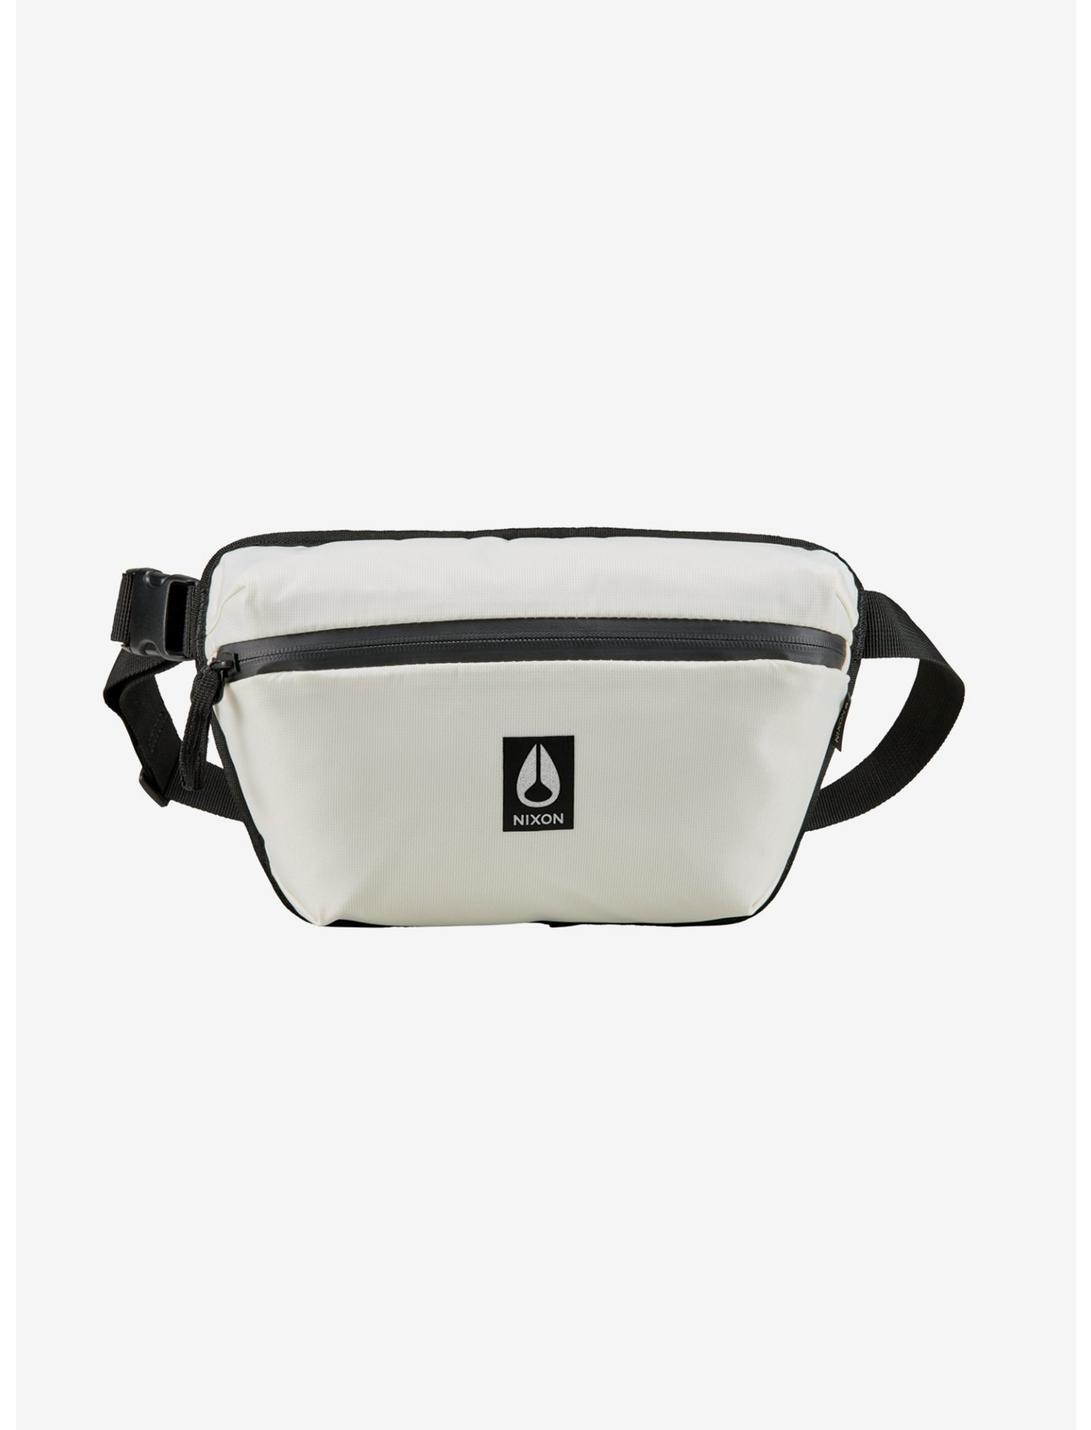 Nixon Day Trippin' Sling White Fanny Pack, , hi-res